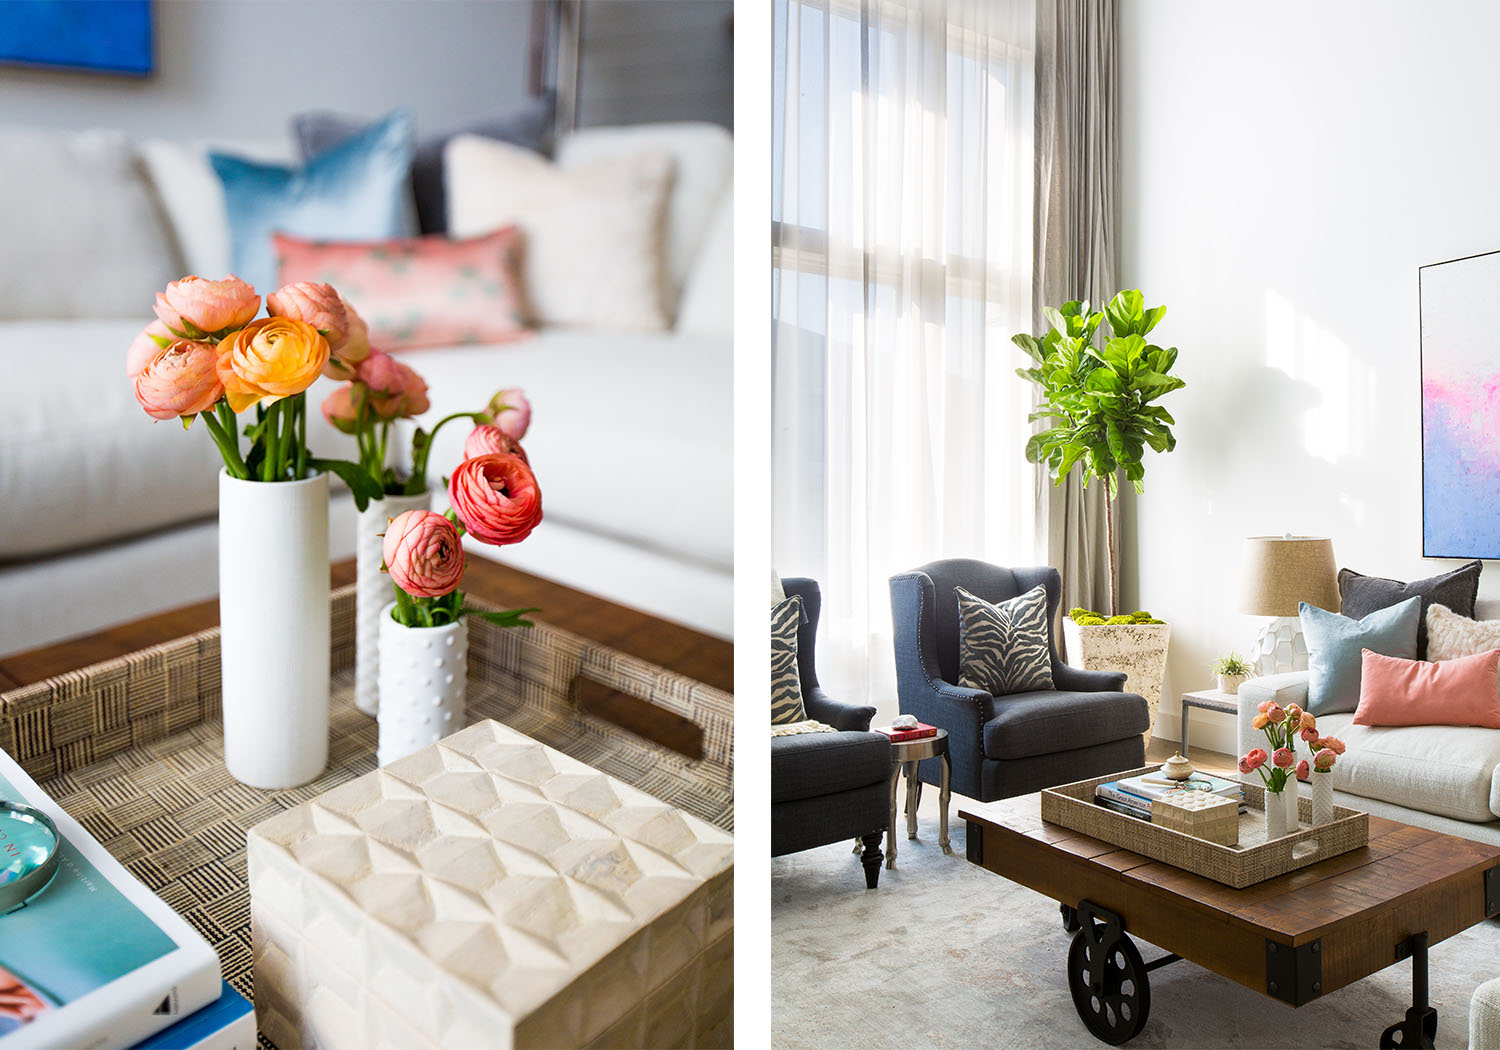 5 EASY WAYS TO PERSONALIZE YOUR SPACE